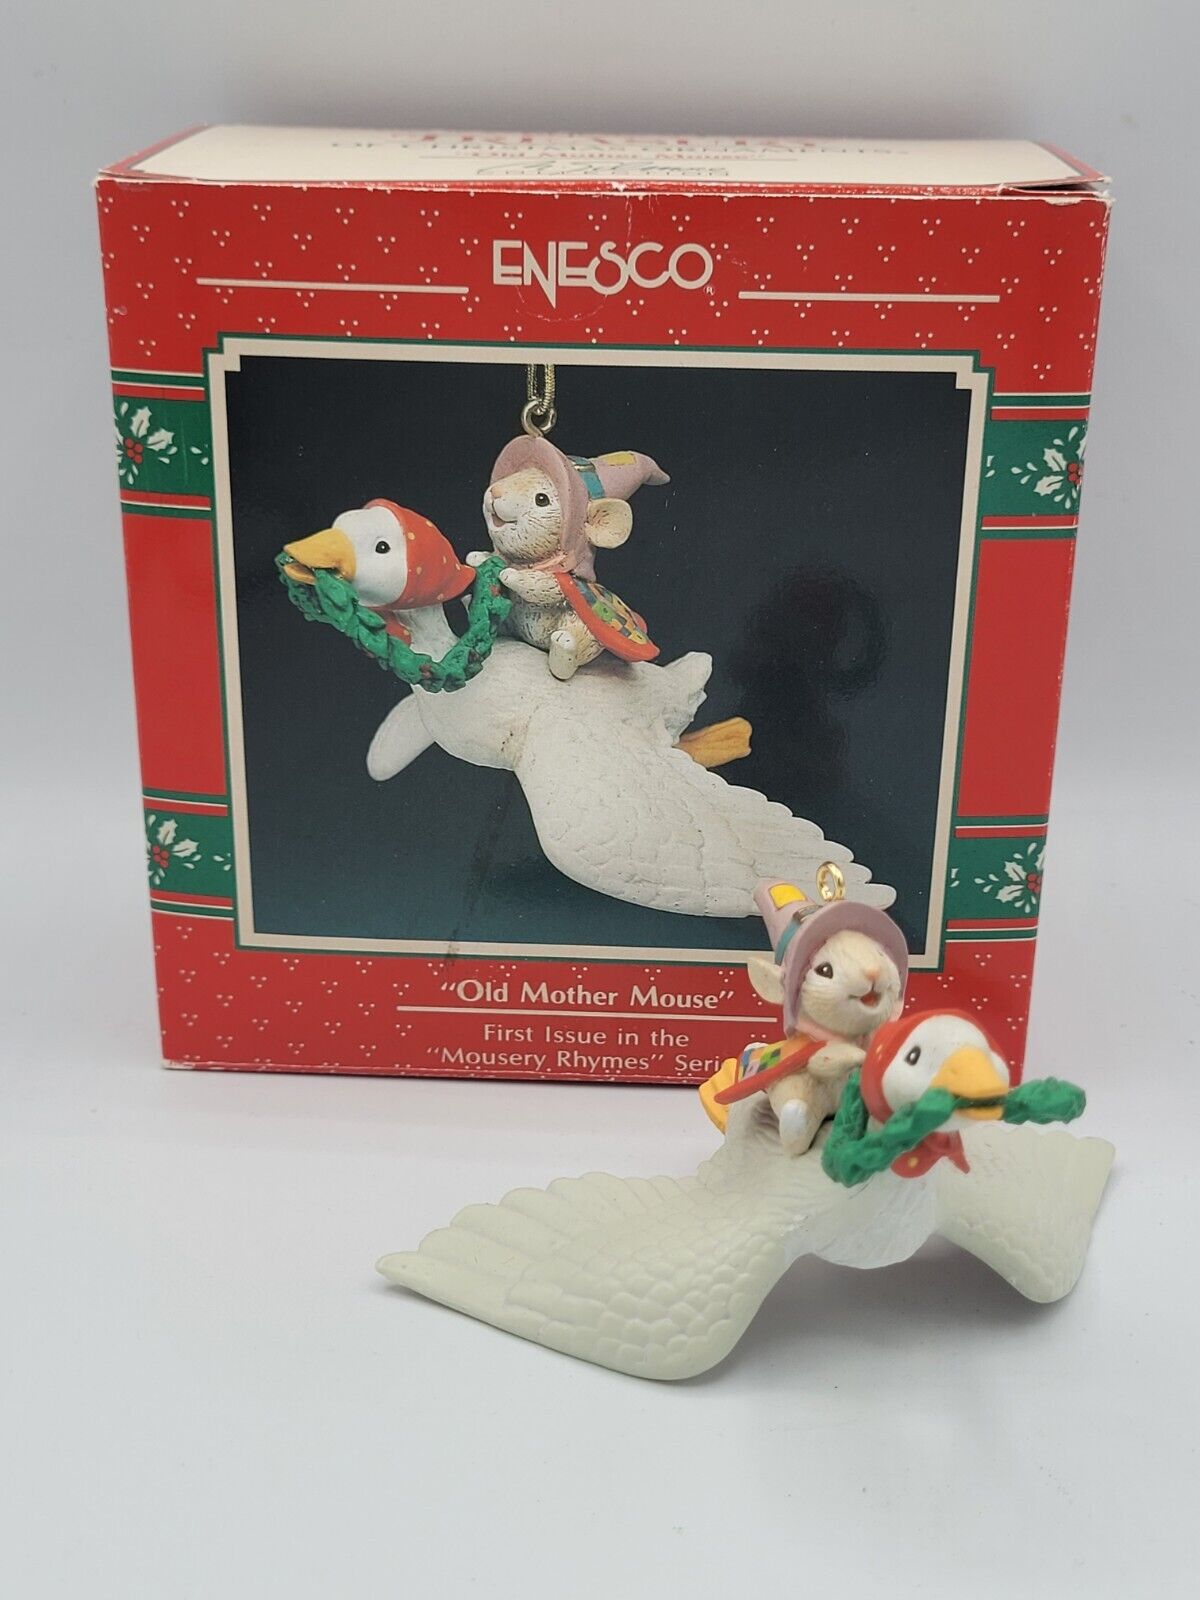 Enesco Christmas Ornament - Old Mother Goose - 1st in Series - 1990 - MIB